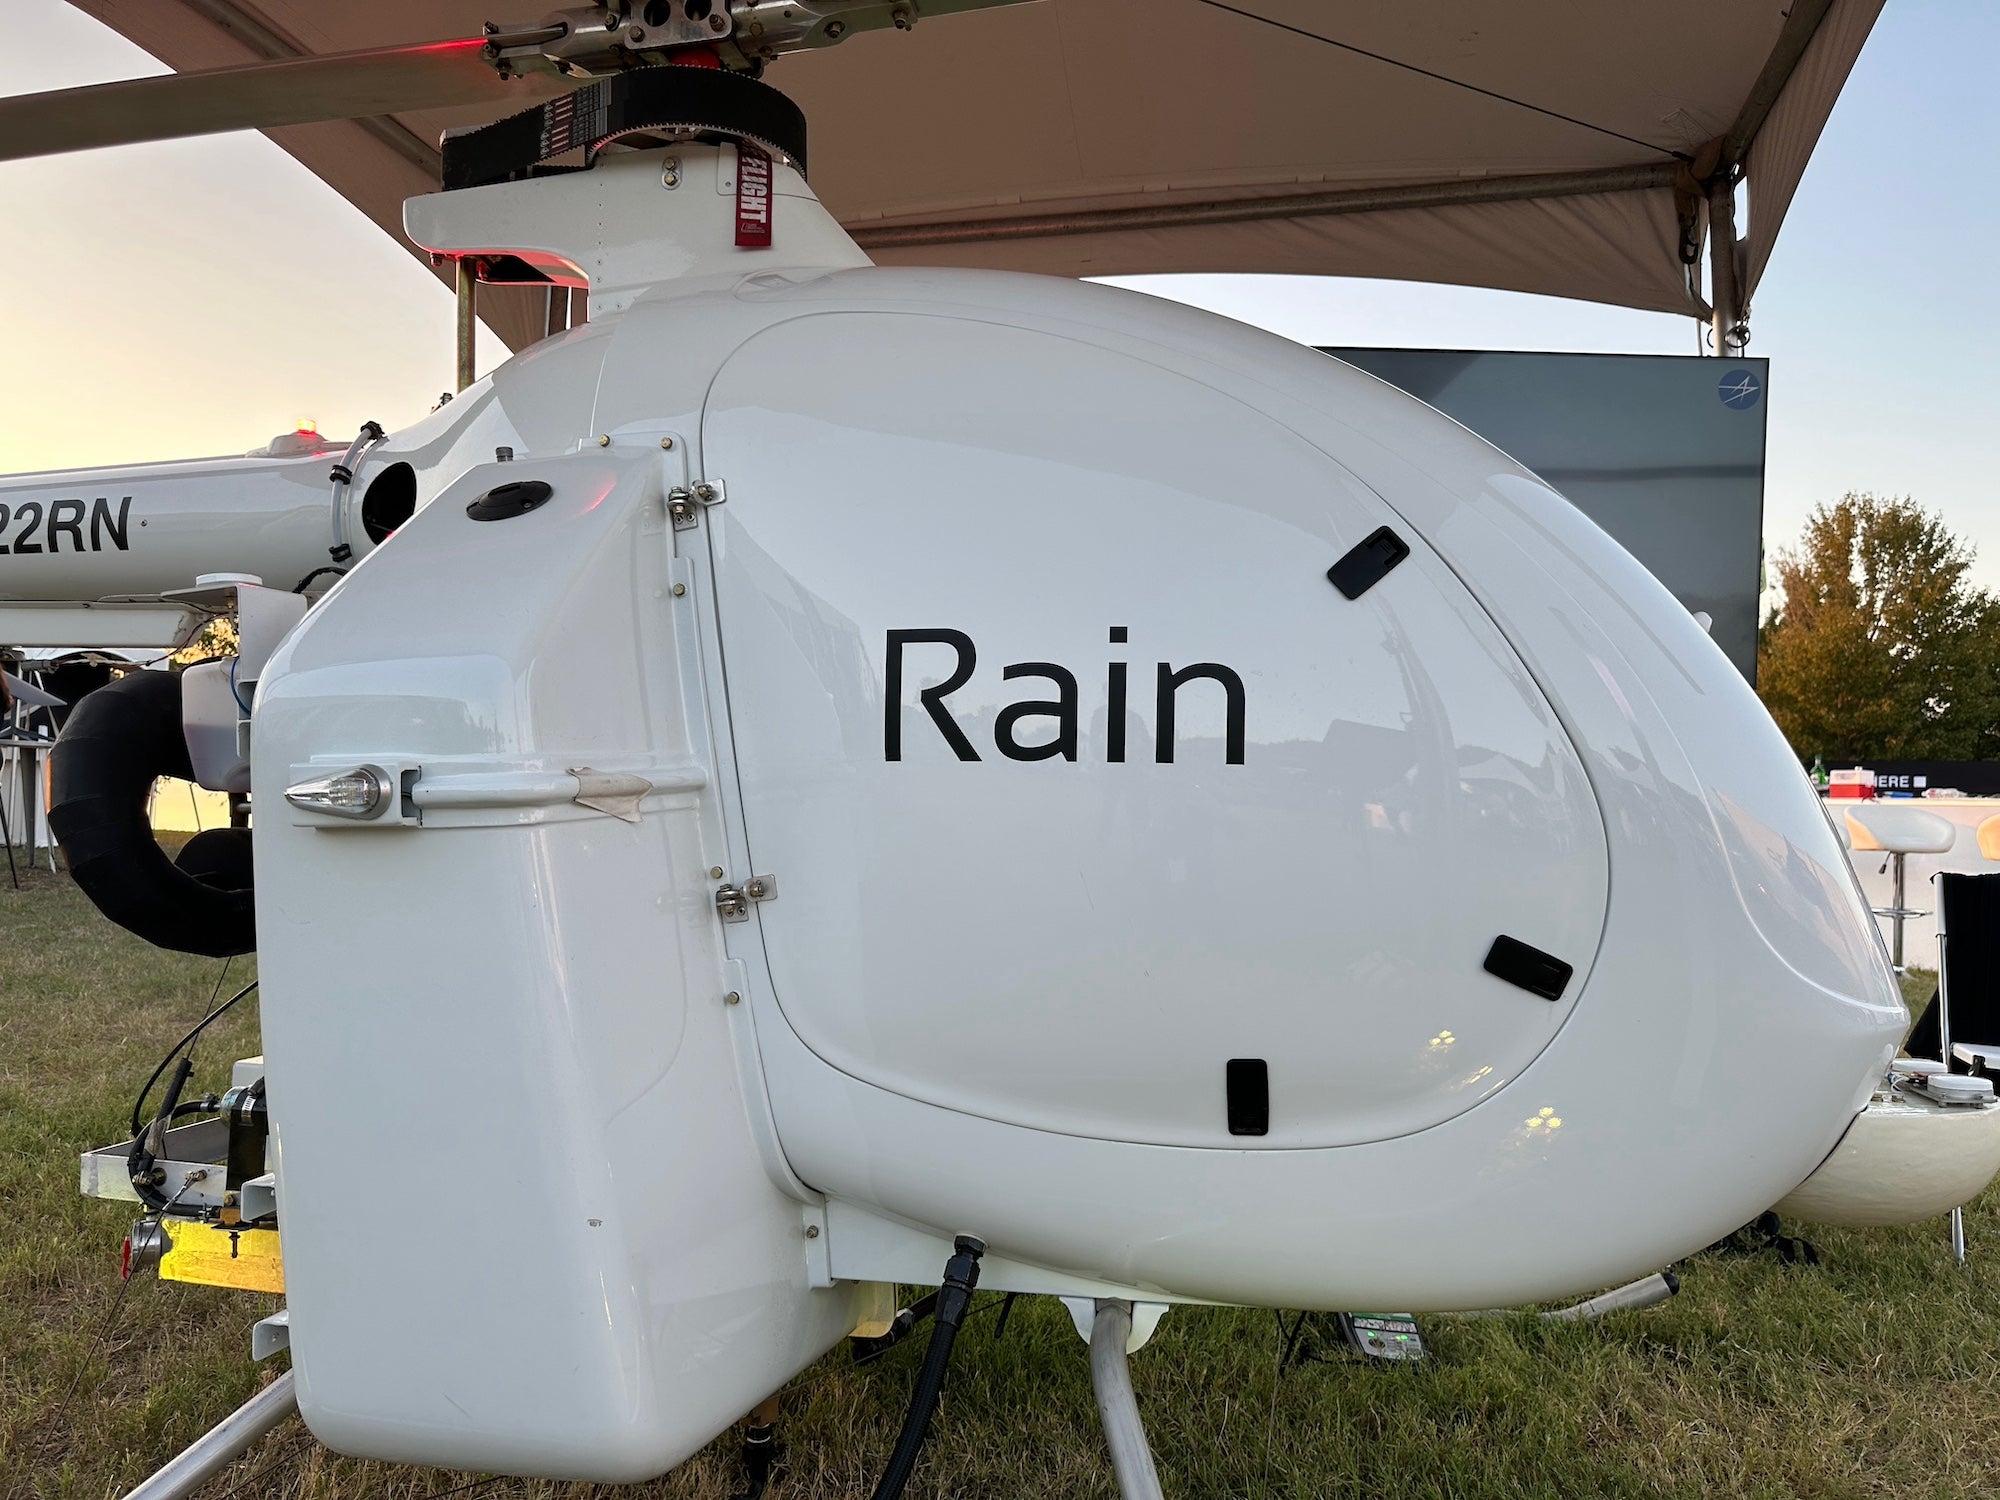 This small robotic helicopter is roughly 22 feet long, 7.5 feet high, and is called the Mosquito. It’s a development aircraft for a company called Rain that’s working on software to snuff out wildfires early. “We’re building technology to stop wildfires before they grow out of control, when they’re the size of a single tree, not when they’re the size of a warzone,” says Maxwell Brodie, the CEO of Rain. They’re collaborating with Sikorsky, which has already developed the tech for a Black Hawk helicopter to be able to fly itself. Brodie says their plan is to eventually pre-position autonomous, uncrewed helicopters (big ones like Black Hawks, not this Mosquito) with their software so they can tackle wildfires with a quickness when they’re small. 